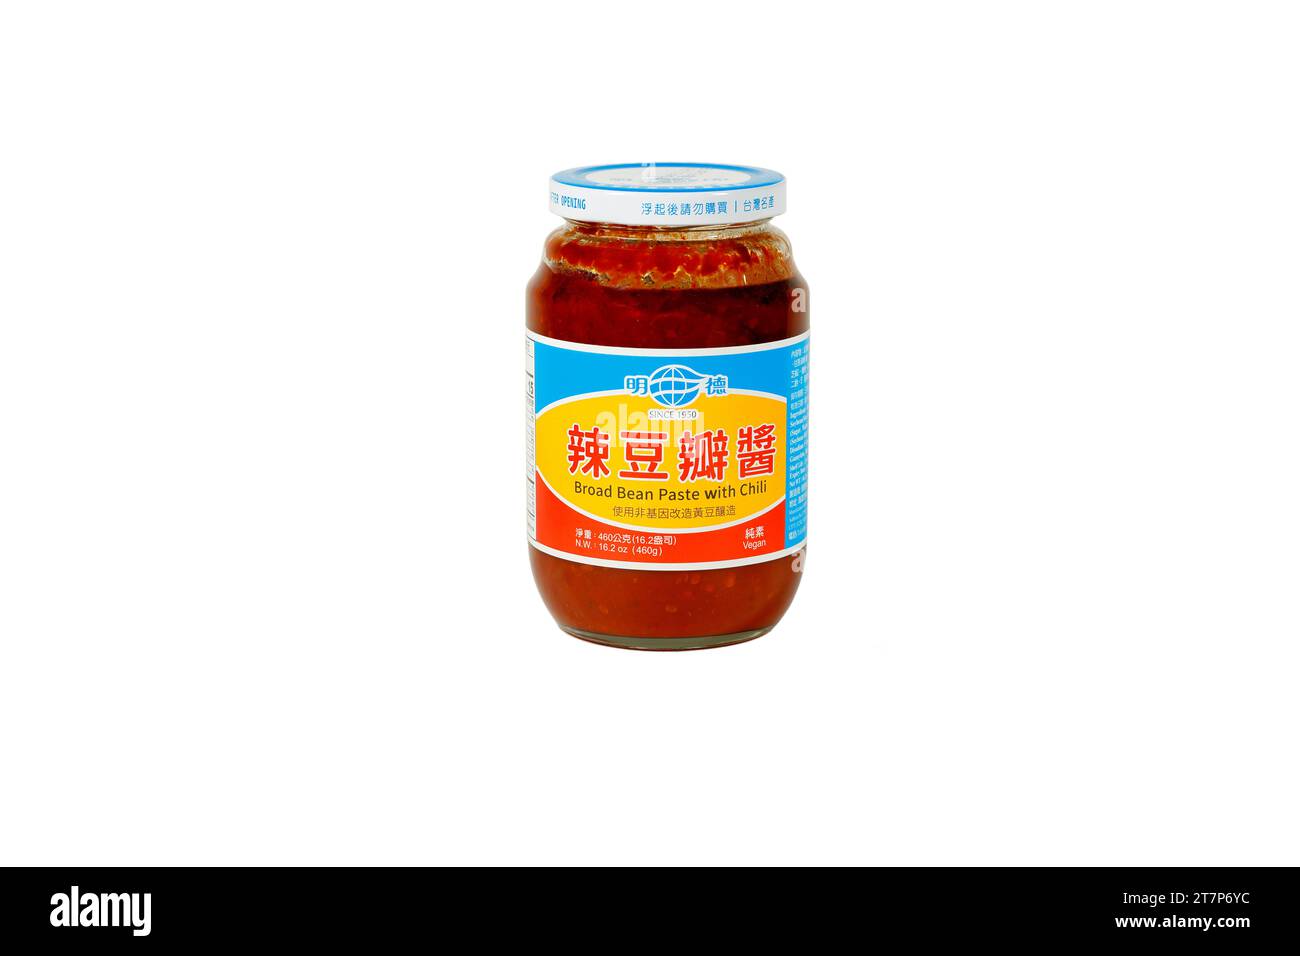 Ming Teh 明德 Broad Bean Paste with Chili 辣豆瓣醬 doubanjiang isolated on a white background. cutout image for illustration and editorial use. Stock Photo